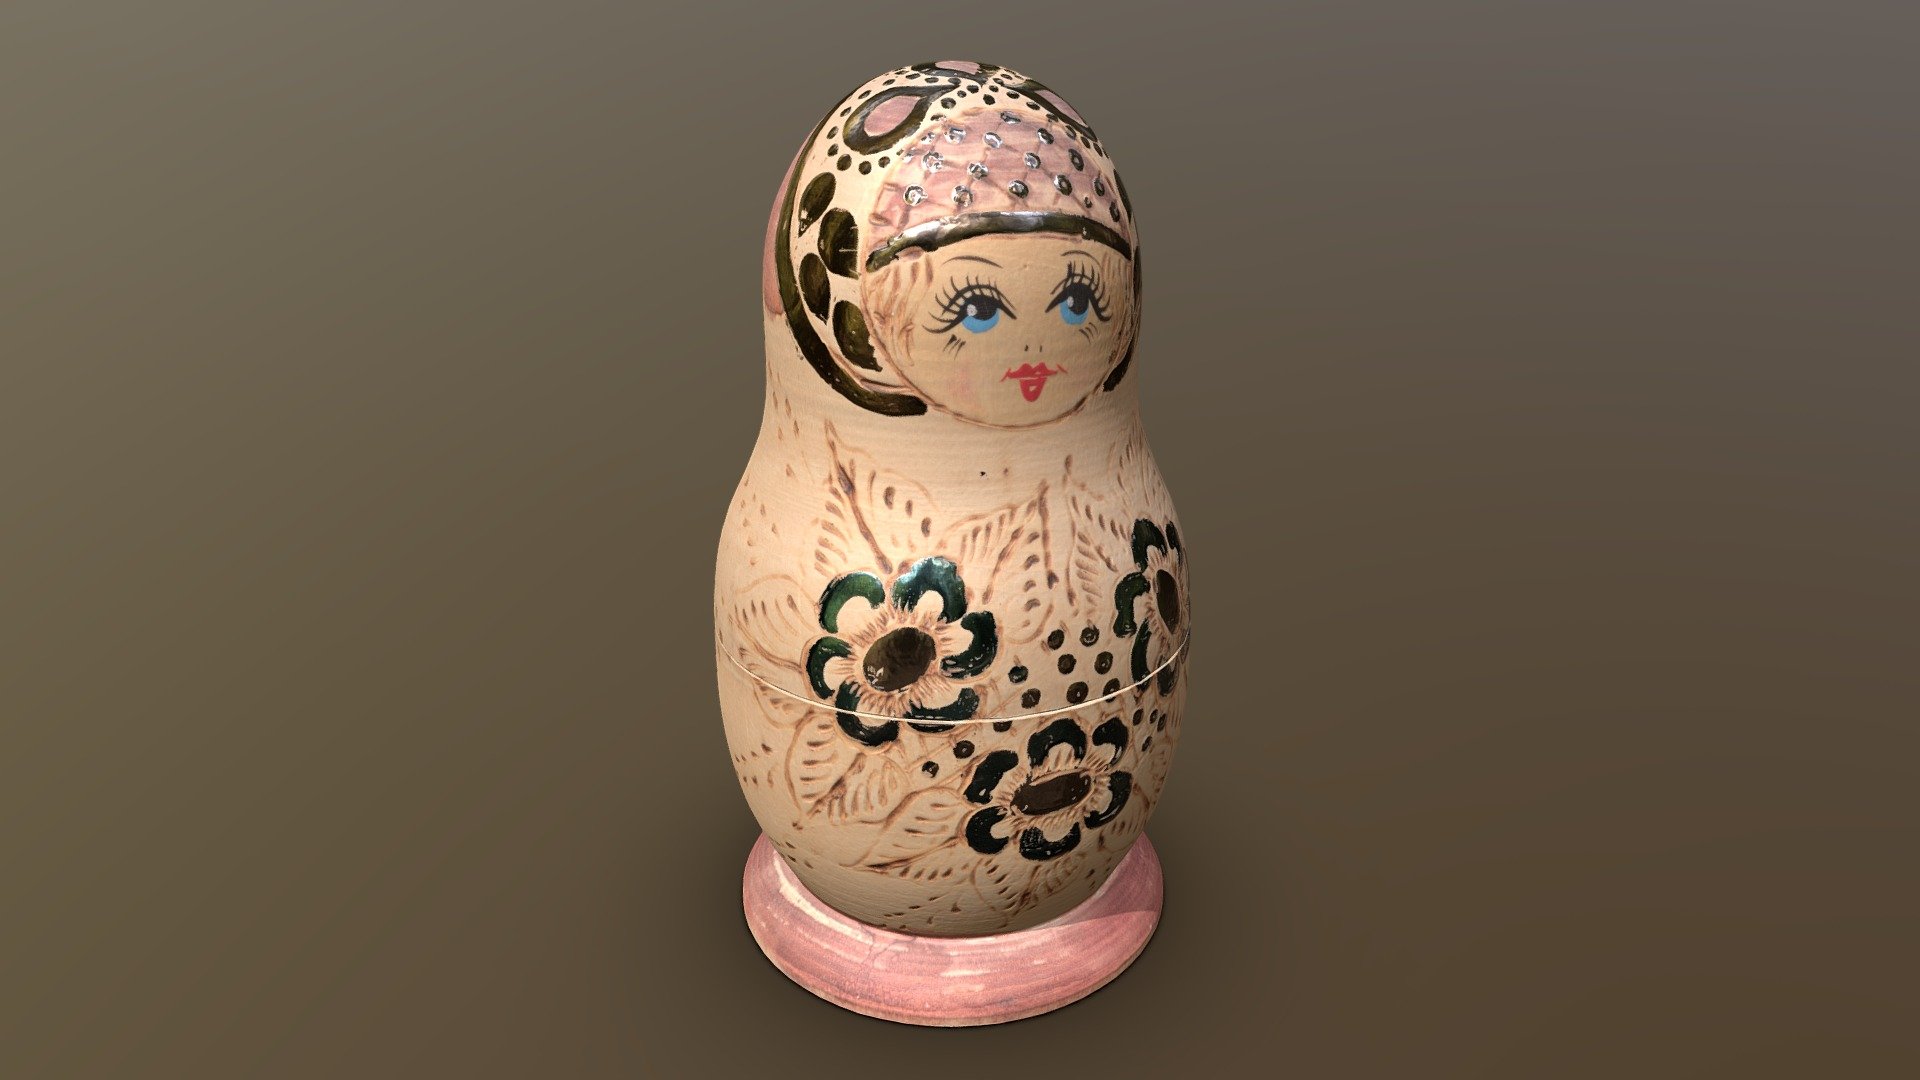 Genuine russian matryoshka doll


Photorealistic
Download contains 3 LODs (0.25x, 1x and 4x vertex count)
Quad based topology
Separate top and bottom halves
Hollow interior fully modeled &amp; textured
PBR Material (Metallic + Roughness)
All textures 4096x4096
Separate optimized normal map for each LOD (or use the &ldquo;medium